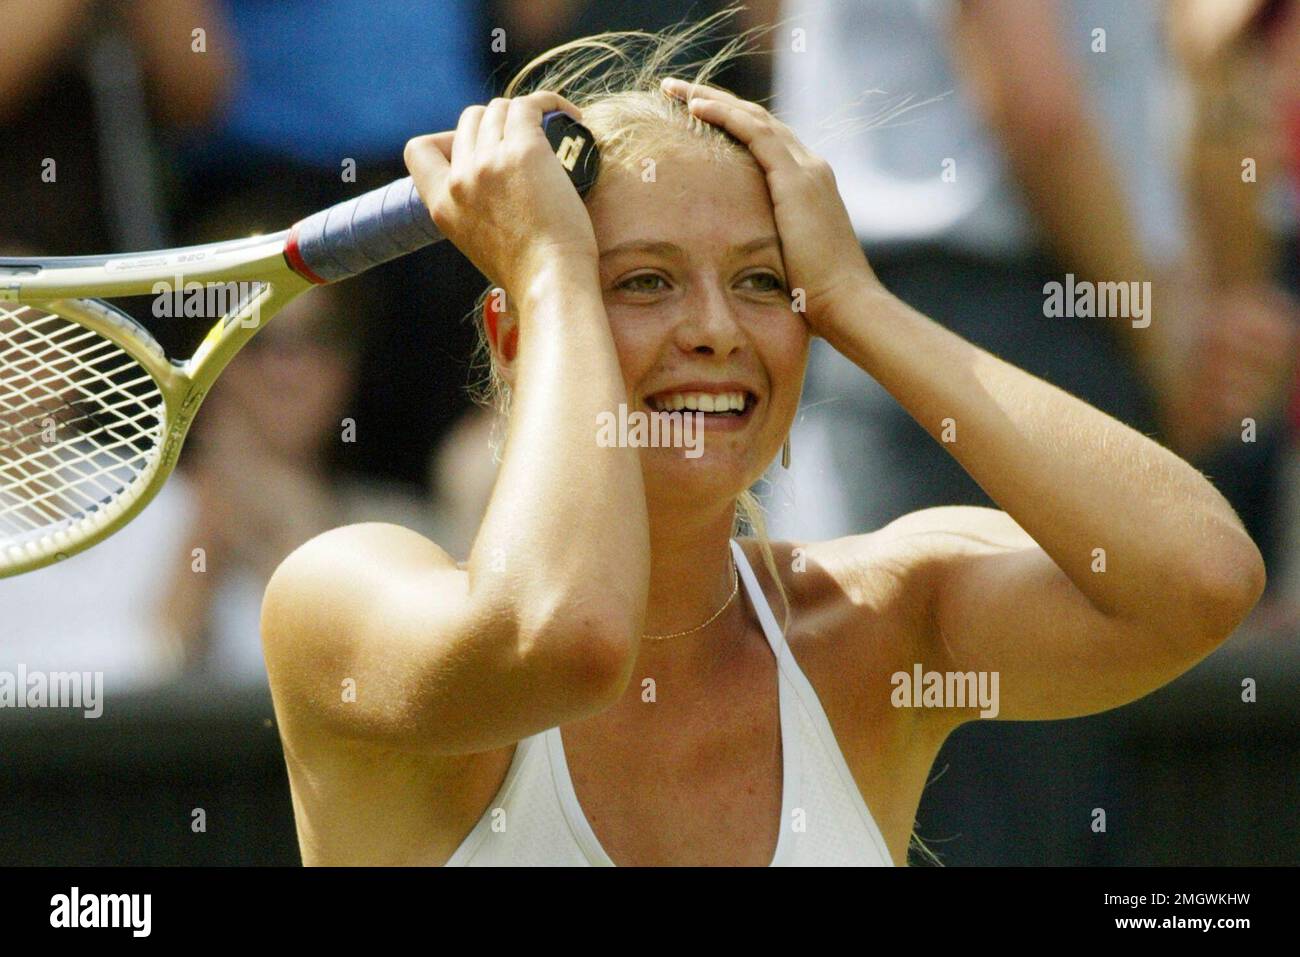 FILE - In this July 1, 2004, file photo, Russia's Maria Sharapova reacts  after defeating Lindsay Davenport in their Women's Singles semi-final match  on the Centre Court at Wimbledon. Sharapova is retiring